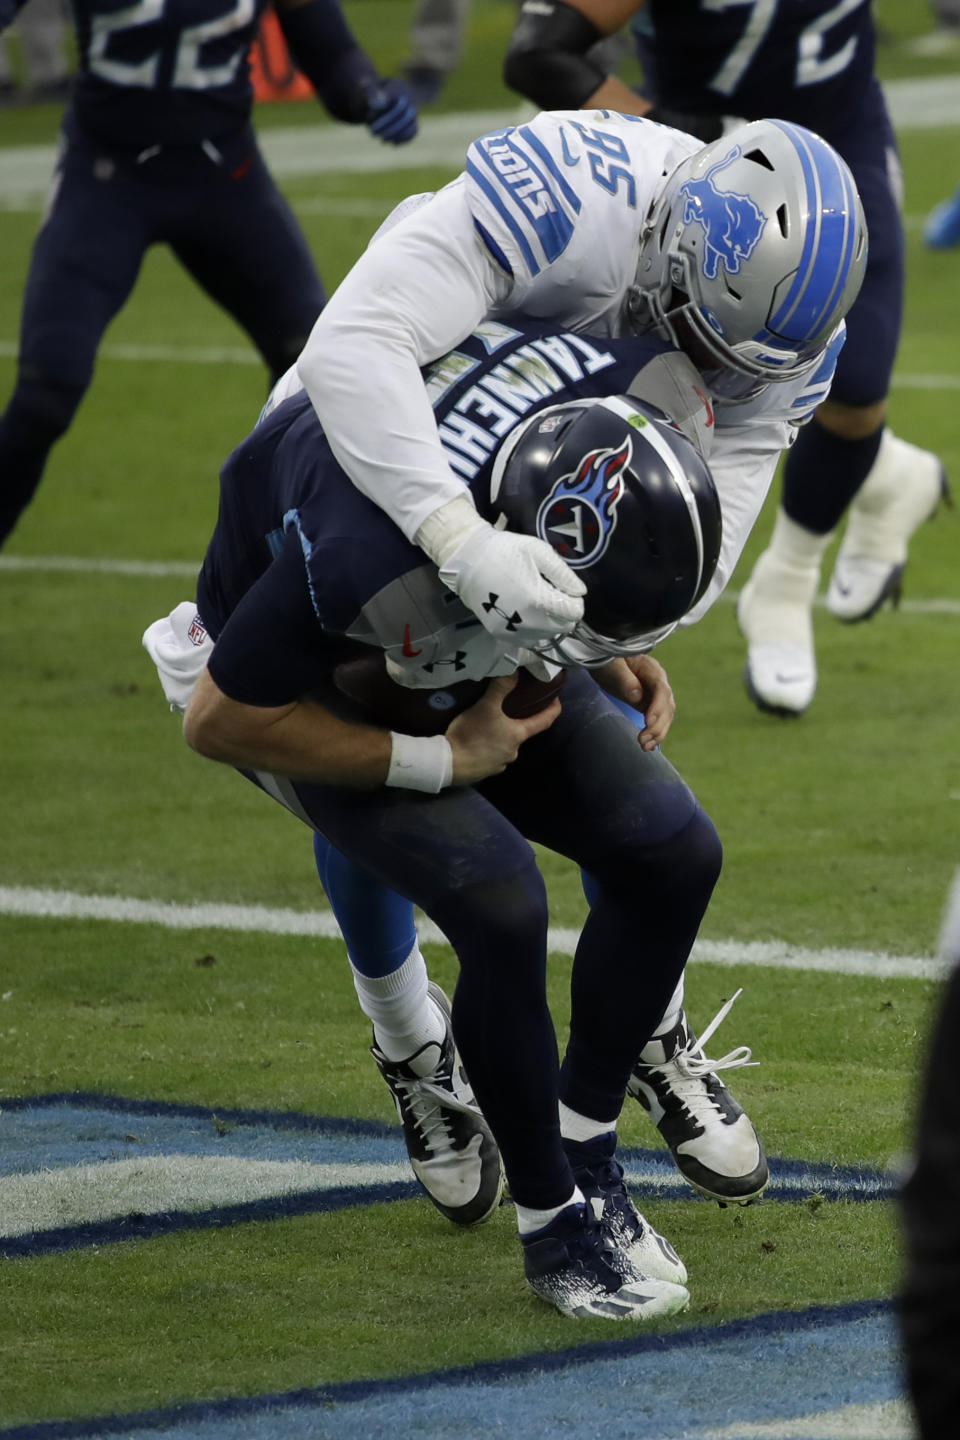 Detroit Lions defensive end Romeo Okwara sacks Tennessee Titans quarterback Ryan Tannehill for a safety during the first half of an NFL football game Sunday, Dec. 20, 2020, in Nashville, N.C. (AP Photo/Ben Margot)